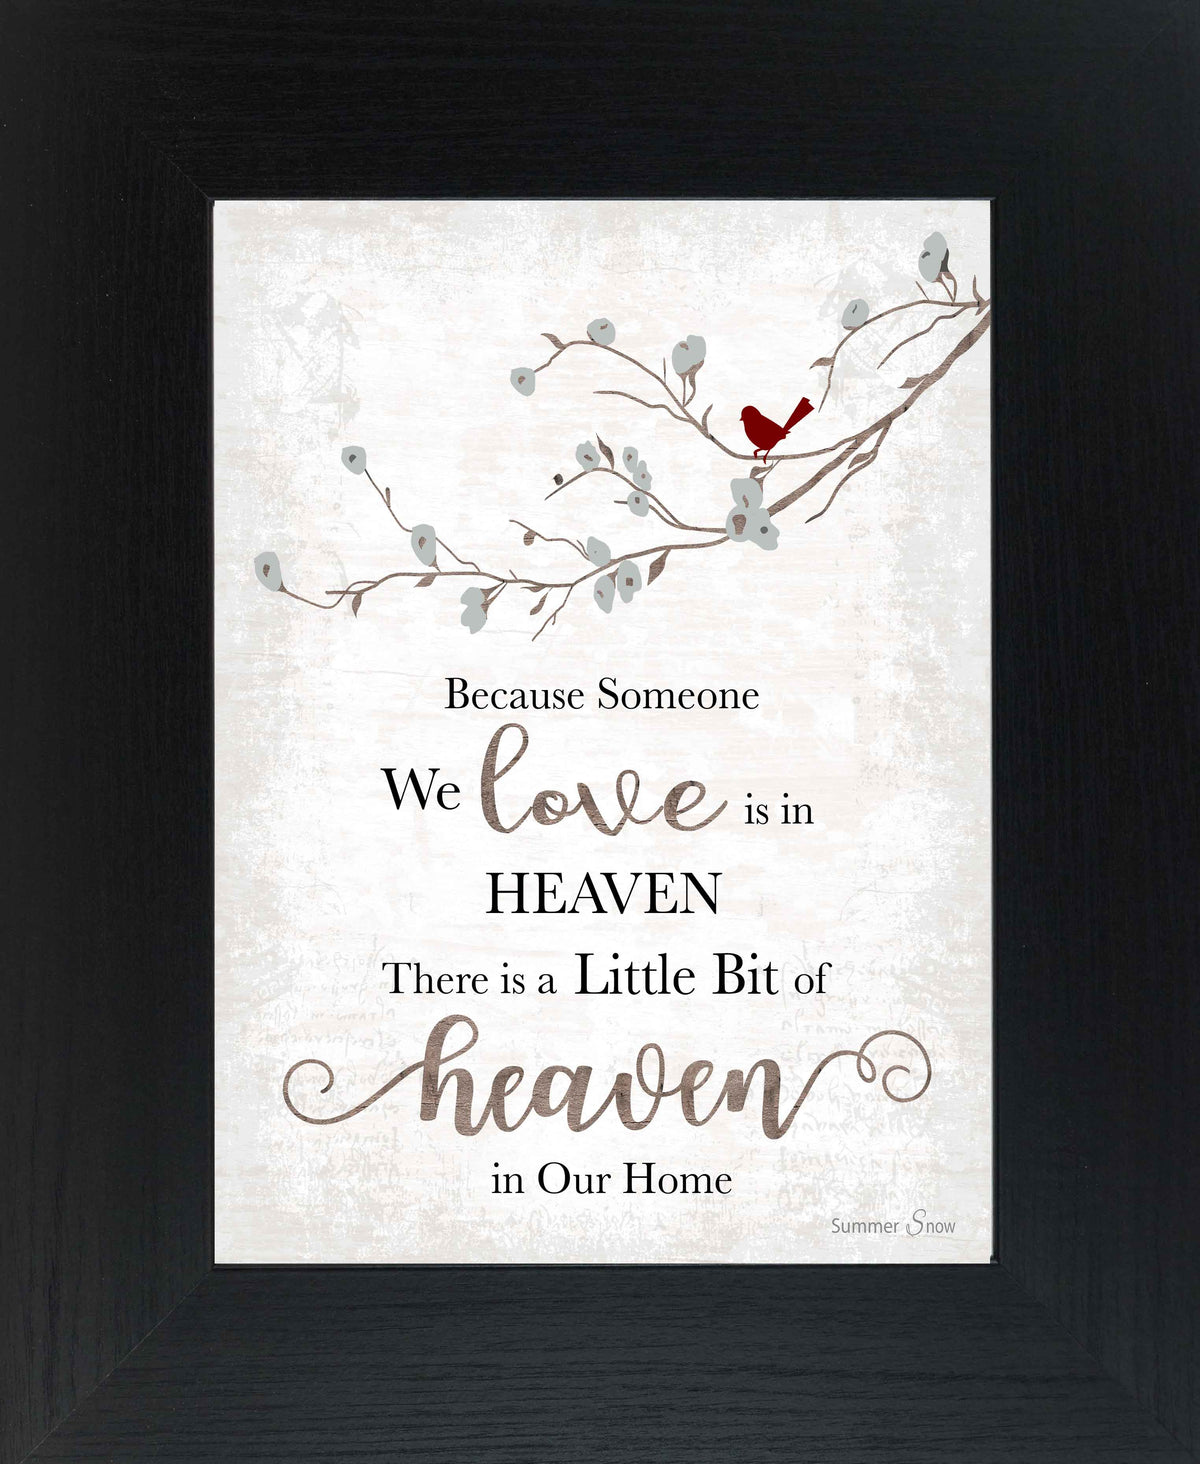 Because Someone We Love is in Heaven SSA193 - Summer Snow Art